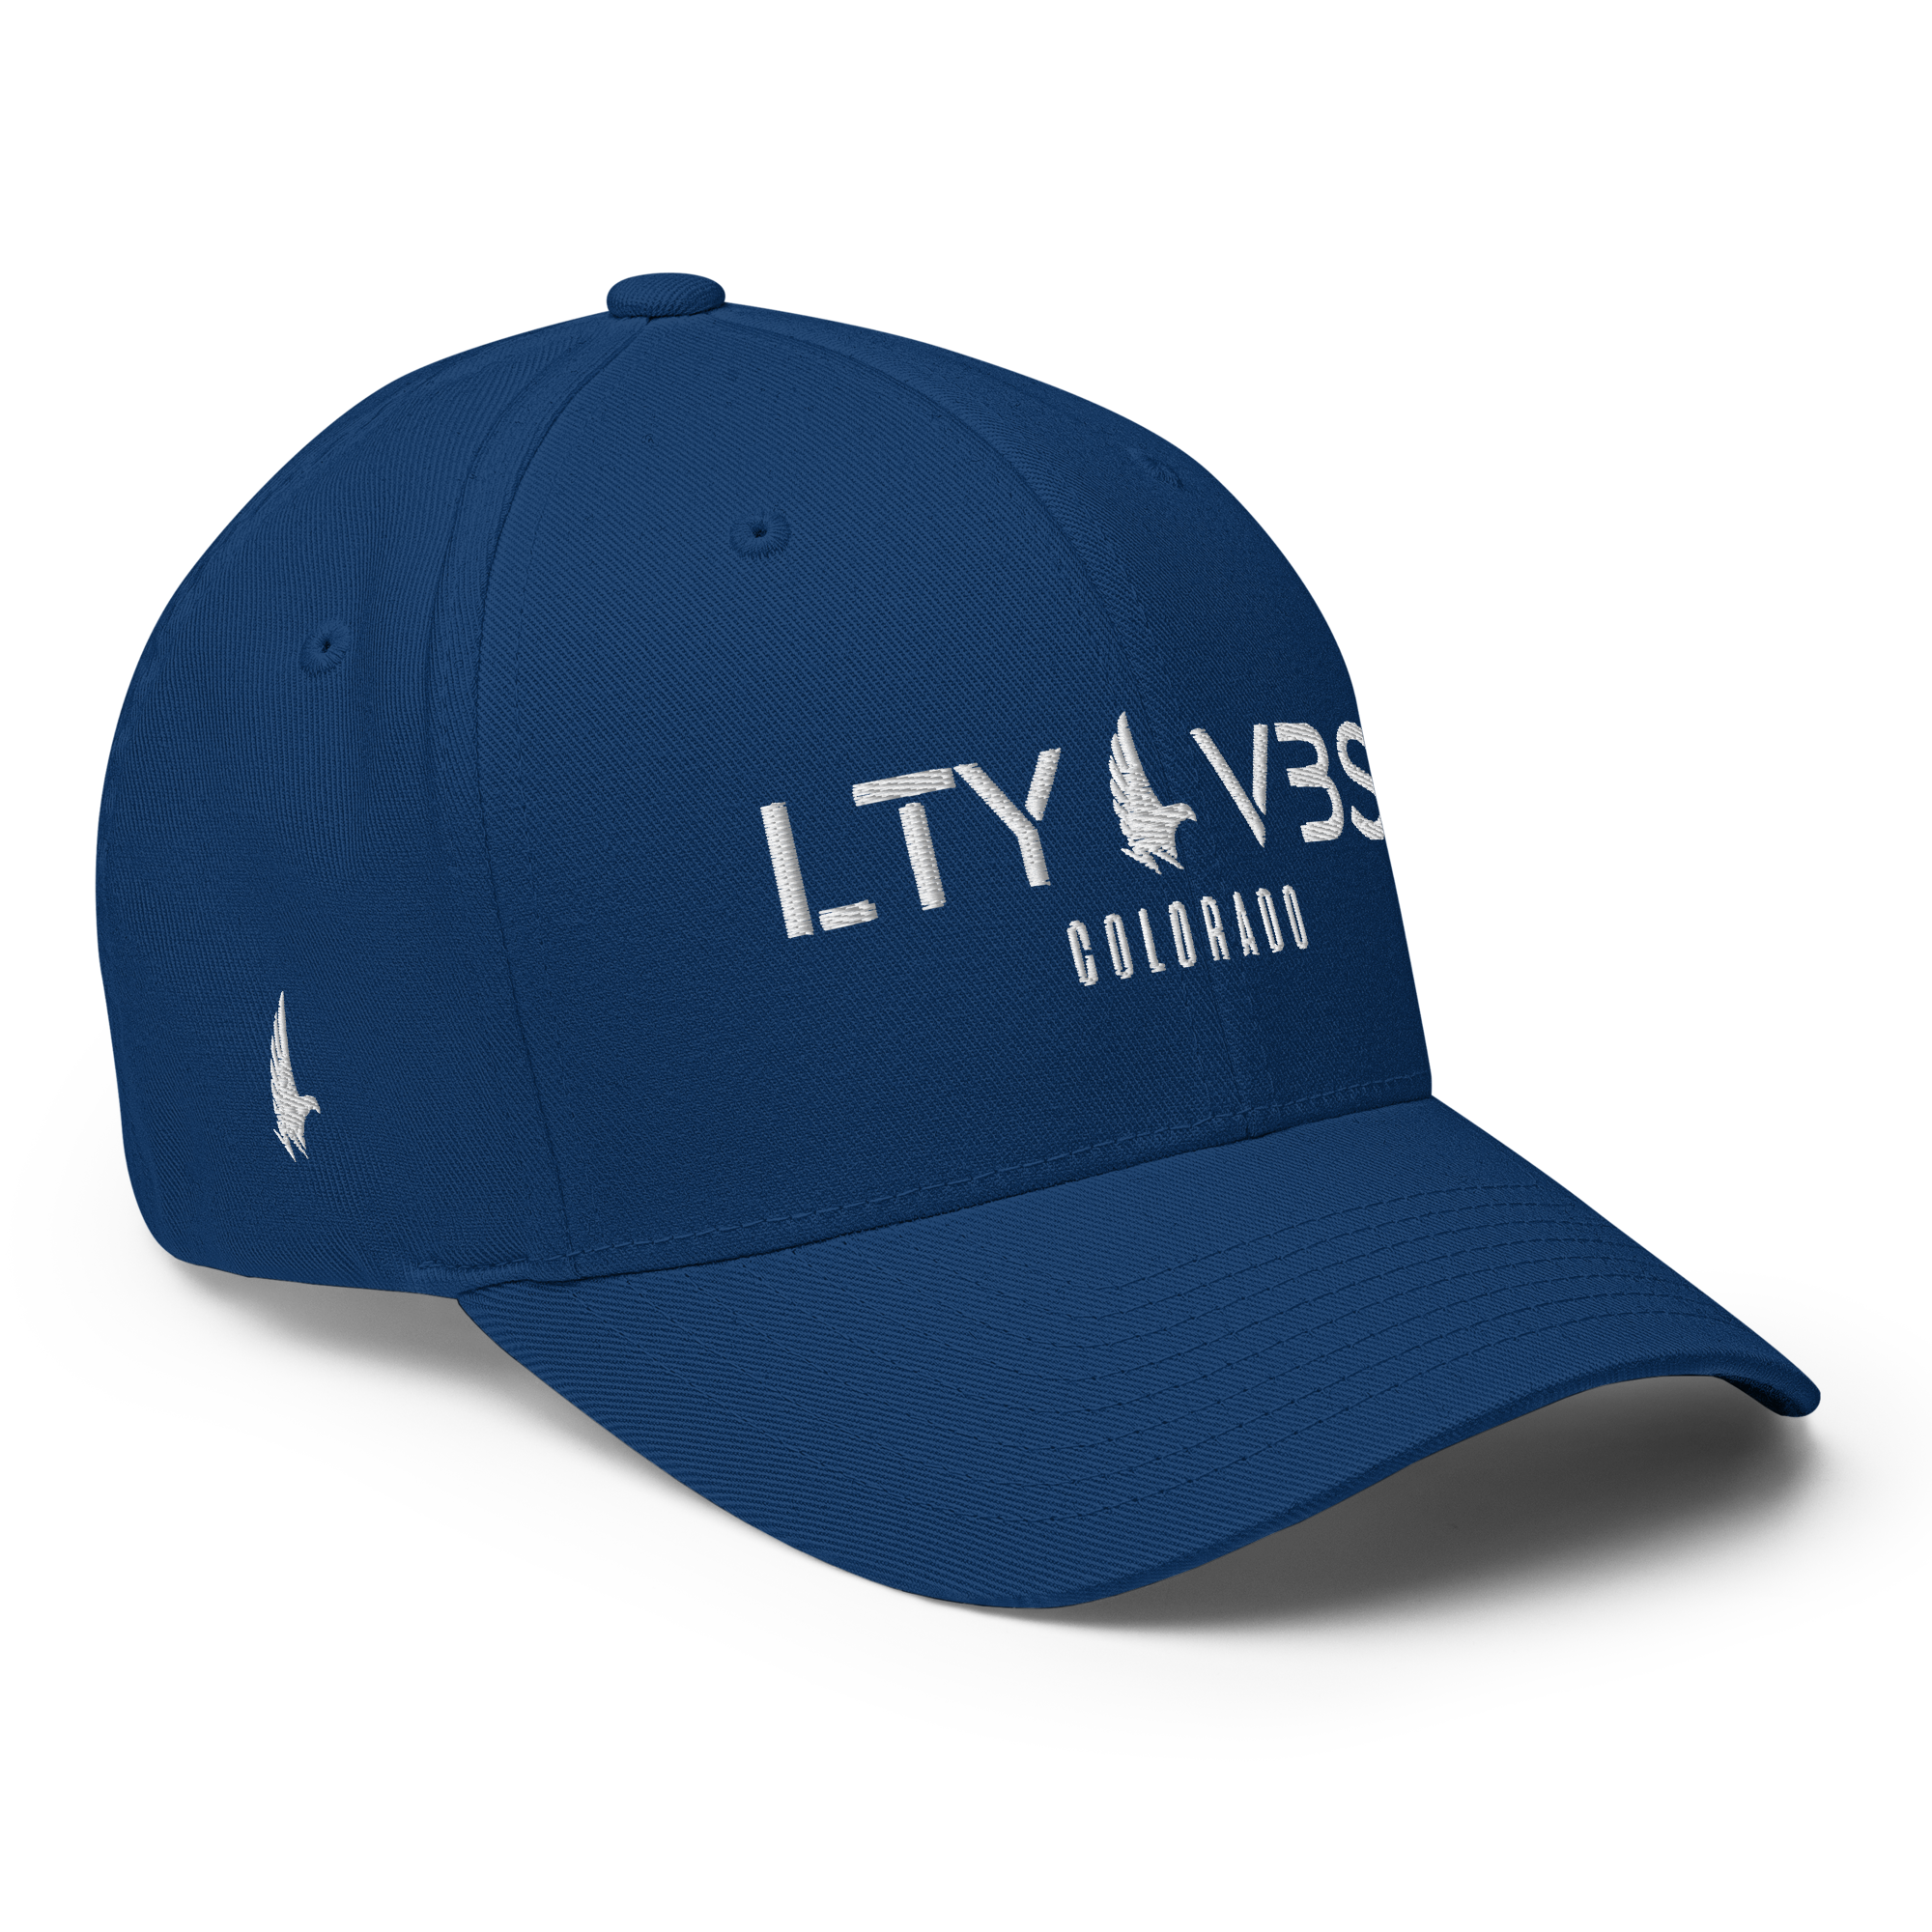 Loyalty Era Colorado Fitted Hat Blue / White Fitted - Loyalty Vibes